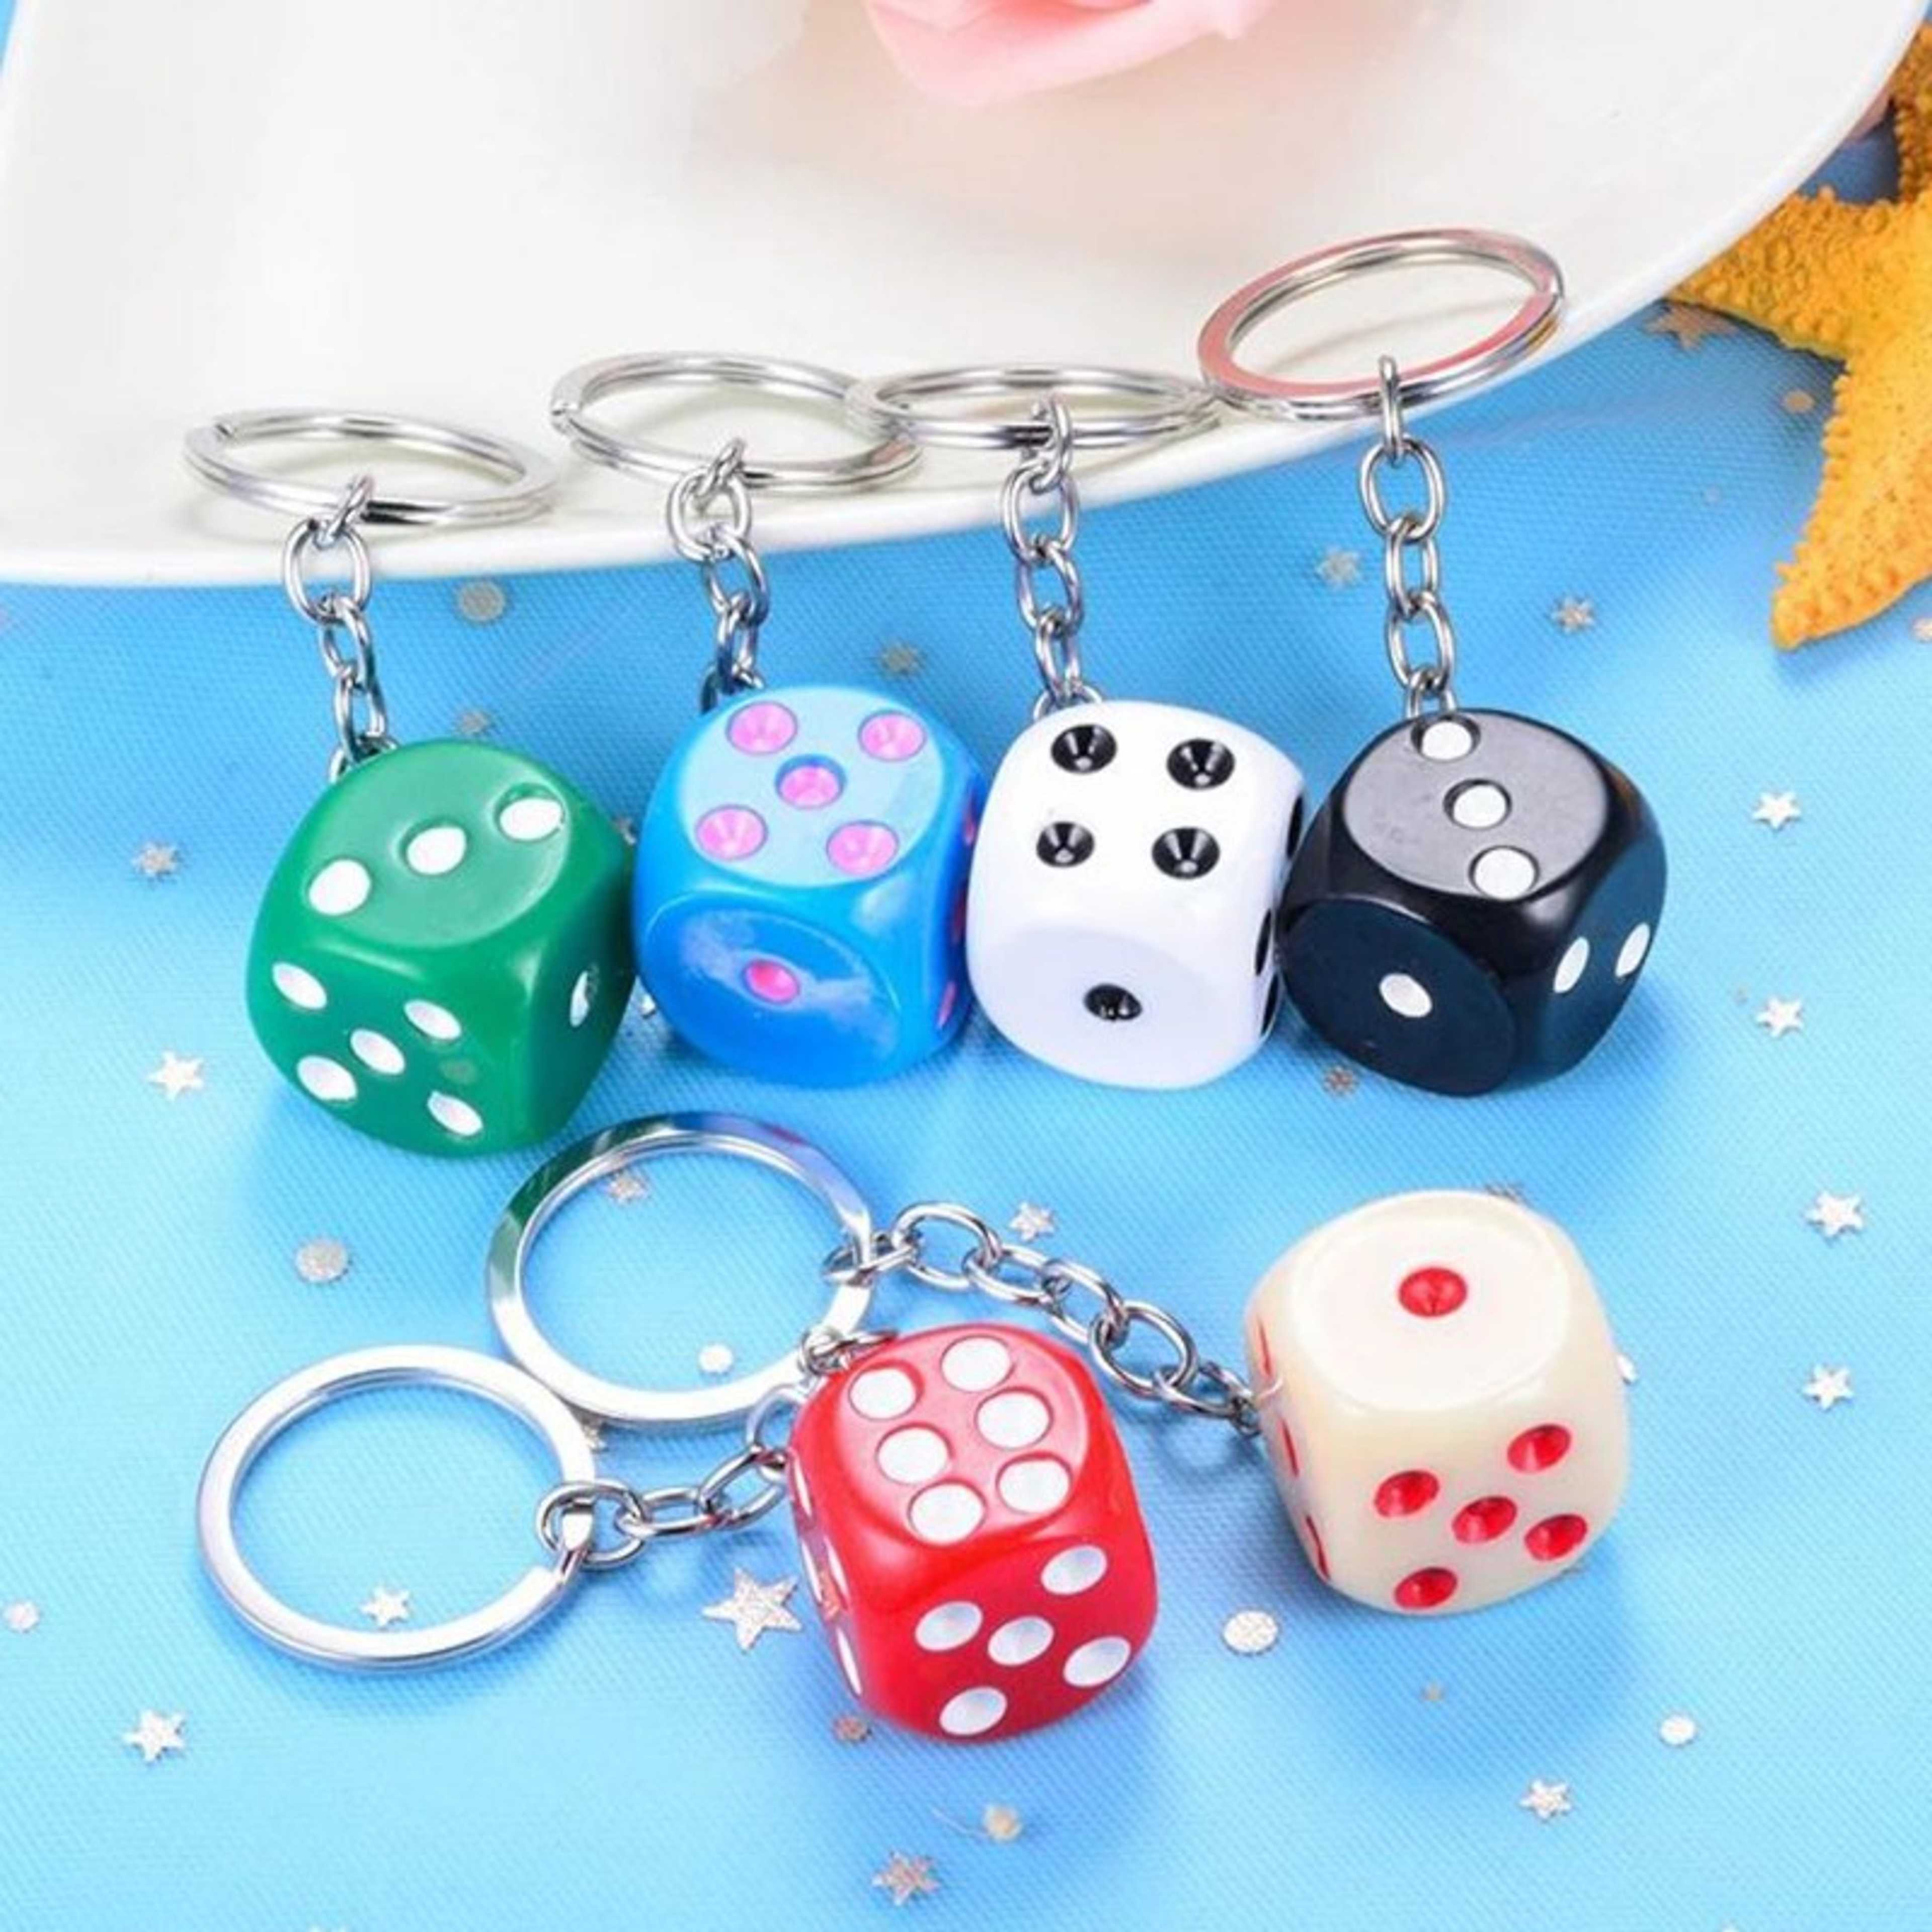 Keychain Ludo Dice 3D (Pack of 1) High Quailty